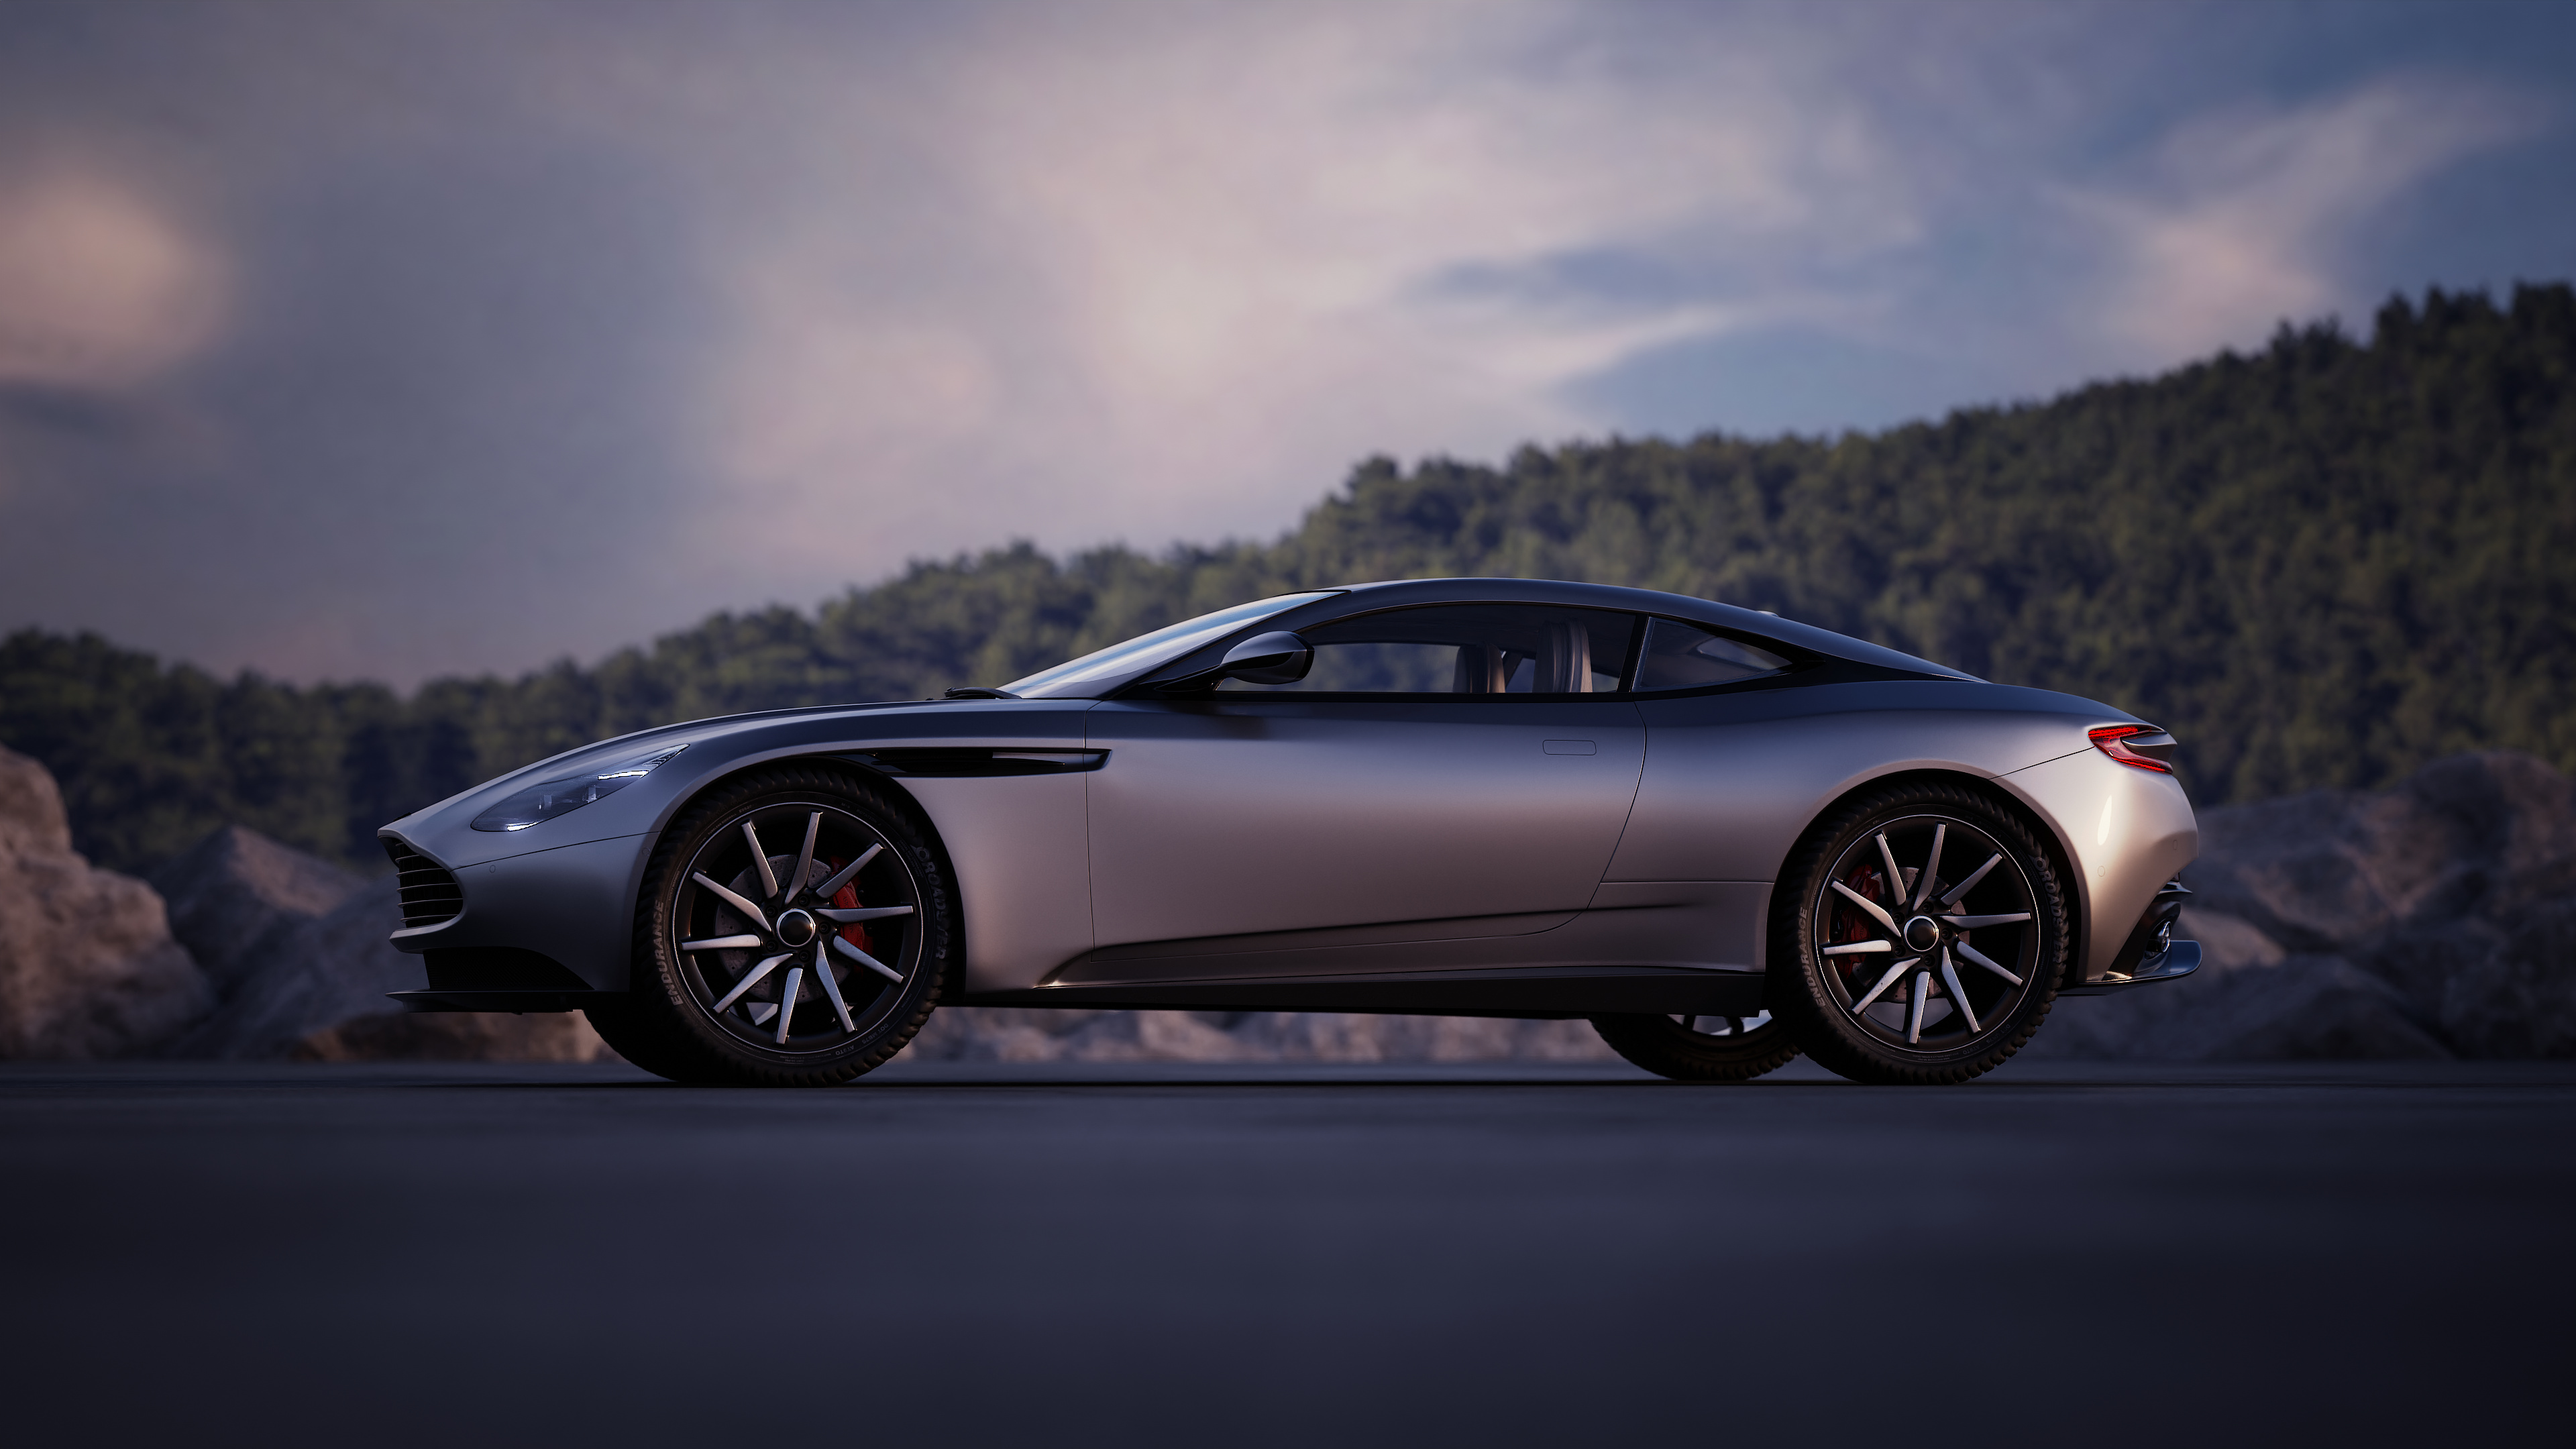 Aston martin db11 - Finished Projects - Blender Artists Community